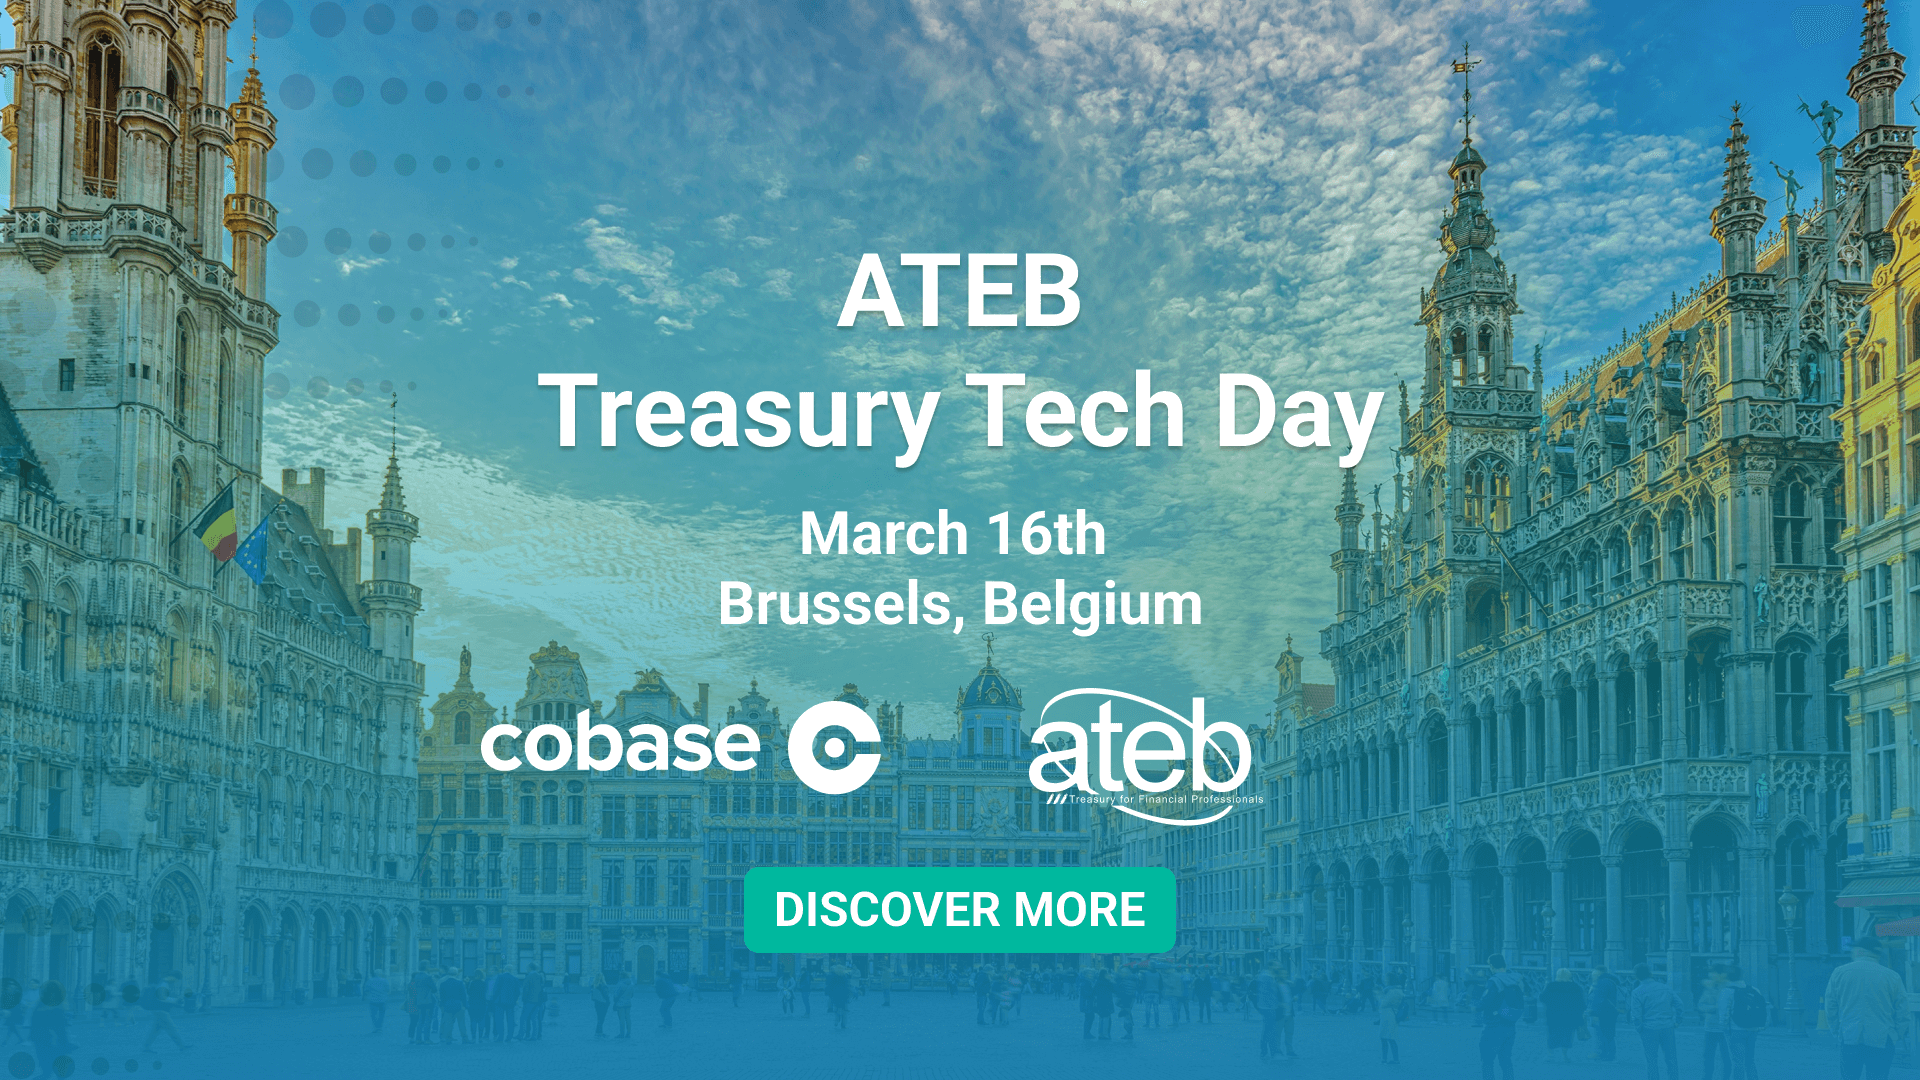 Cobase and ATEB logo's and picture of Brussels